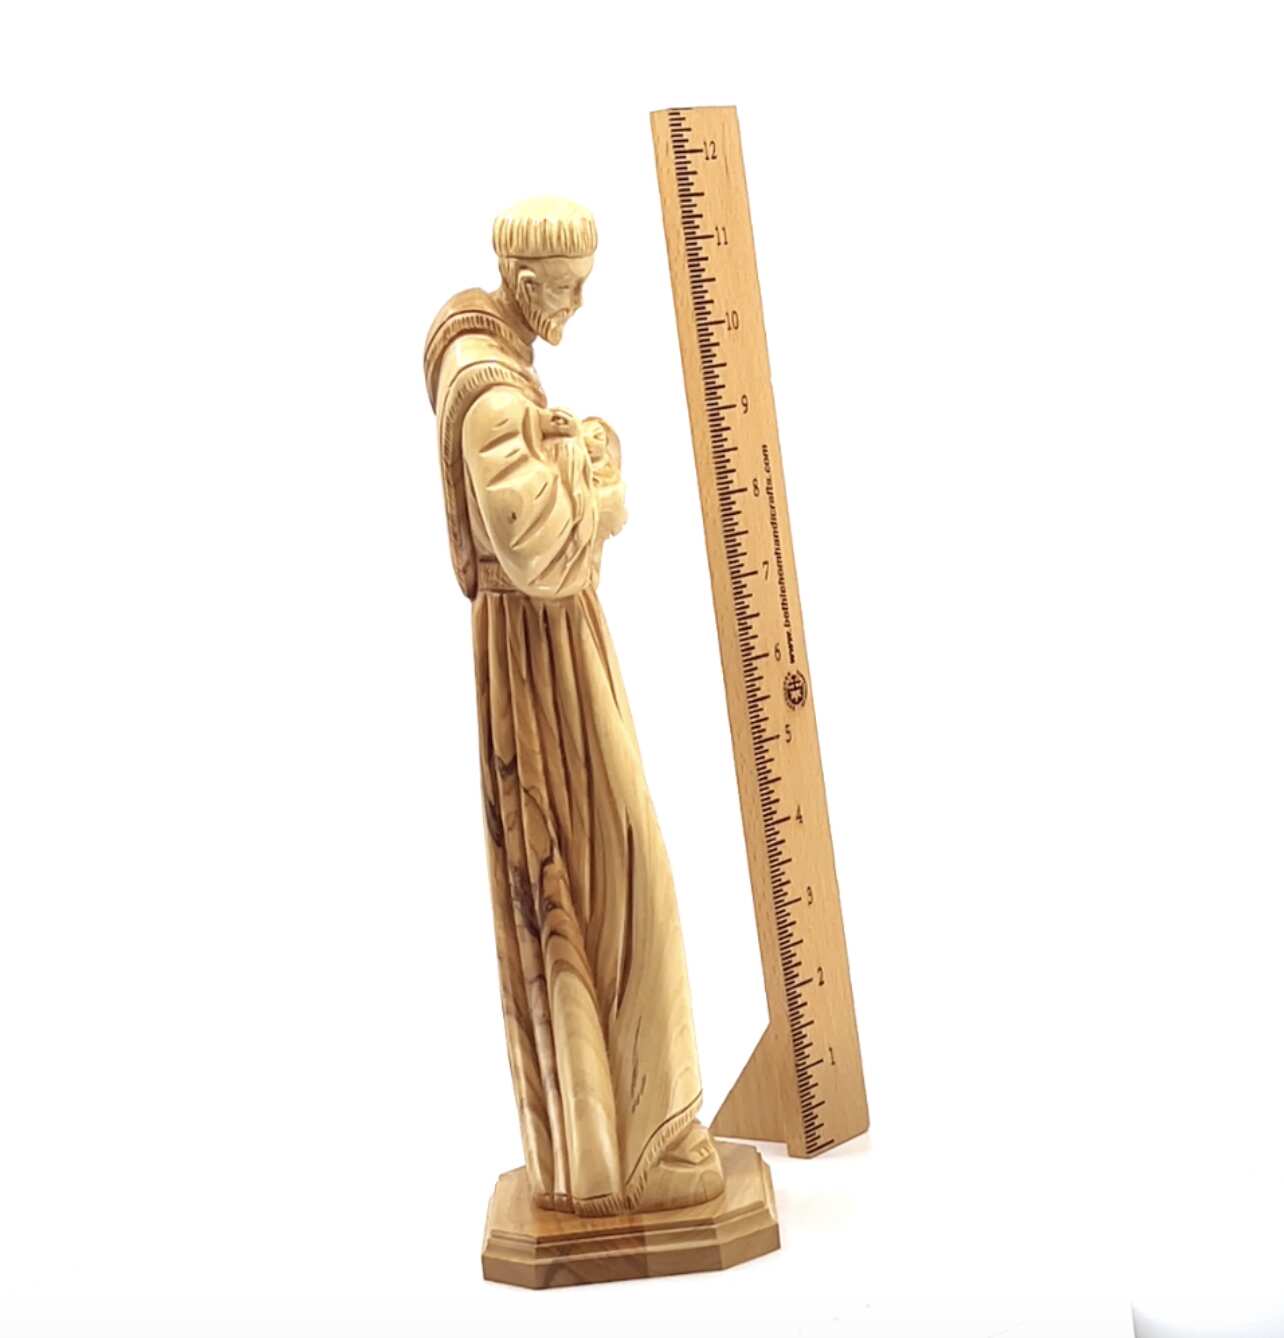 Francis of Assisi, Patron Saint of Ecology, 11.4" Tall Carved Statue